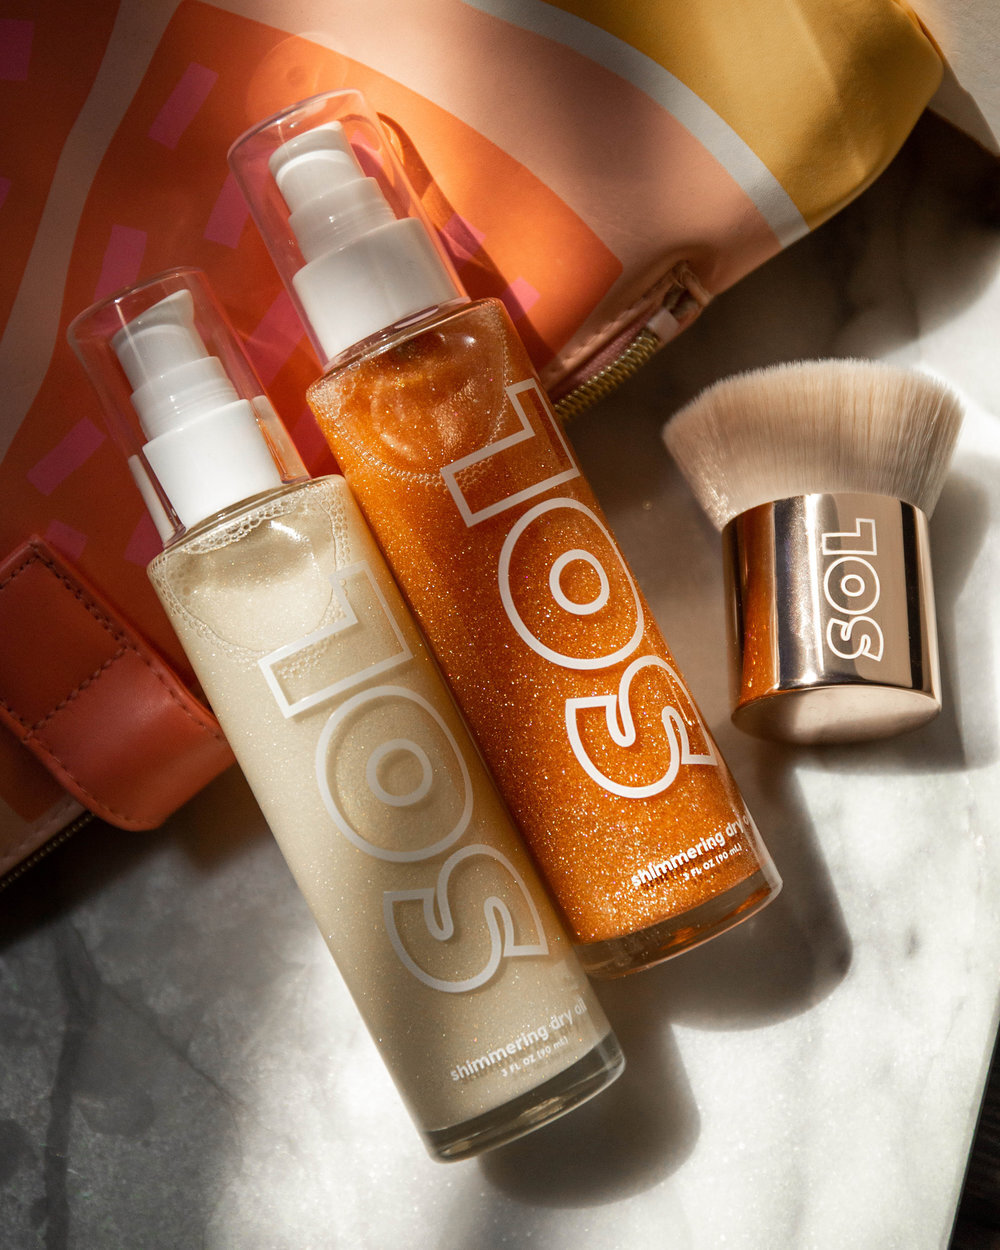 Sol Body products